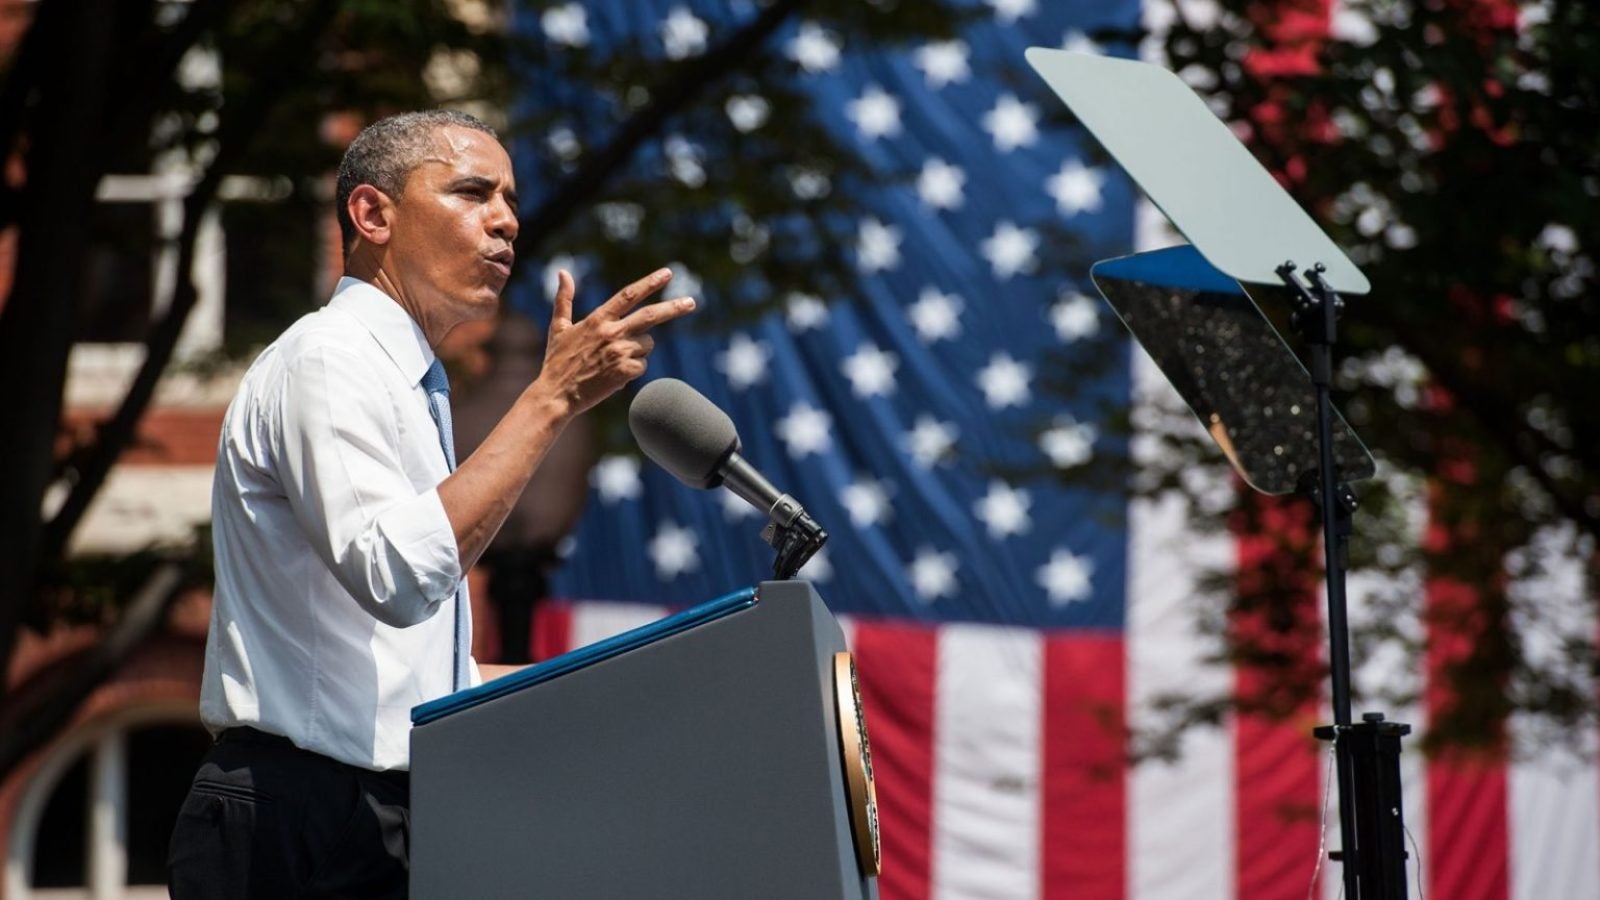 President Obama speaks at a podium at Georgetown against the backdrop of an American Flag.